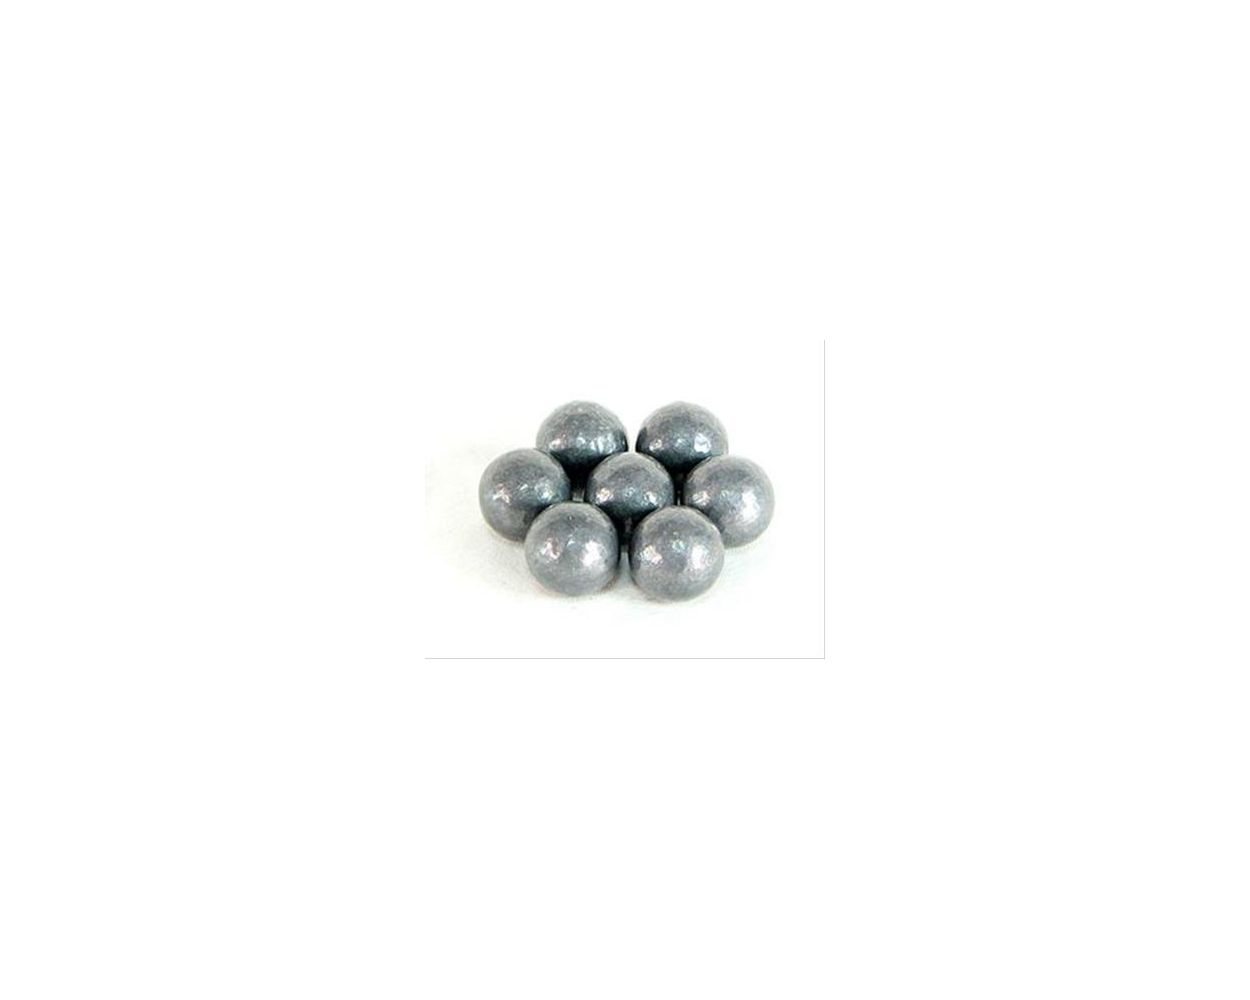 310 32 Caliber Hornady Swaged Lead Round Balls Box of 100